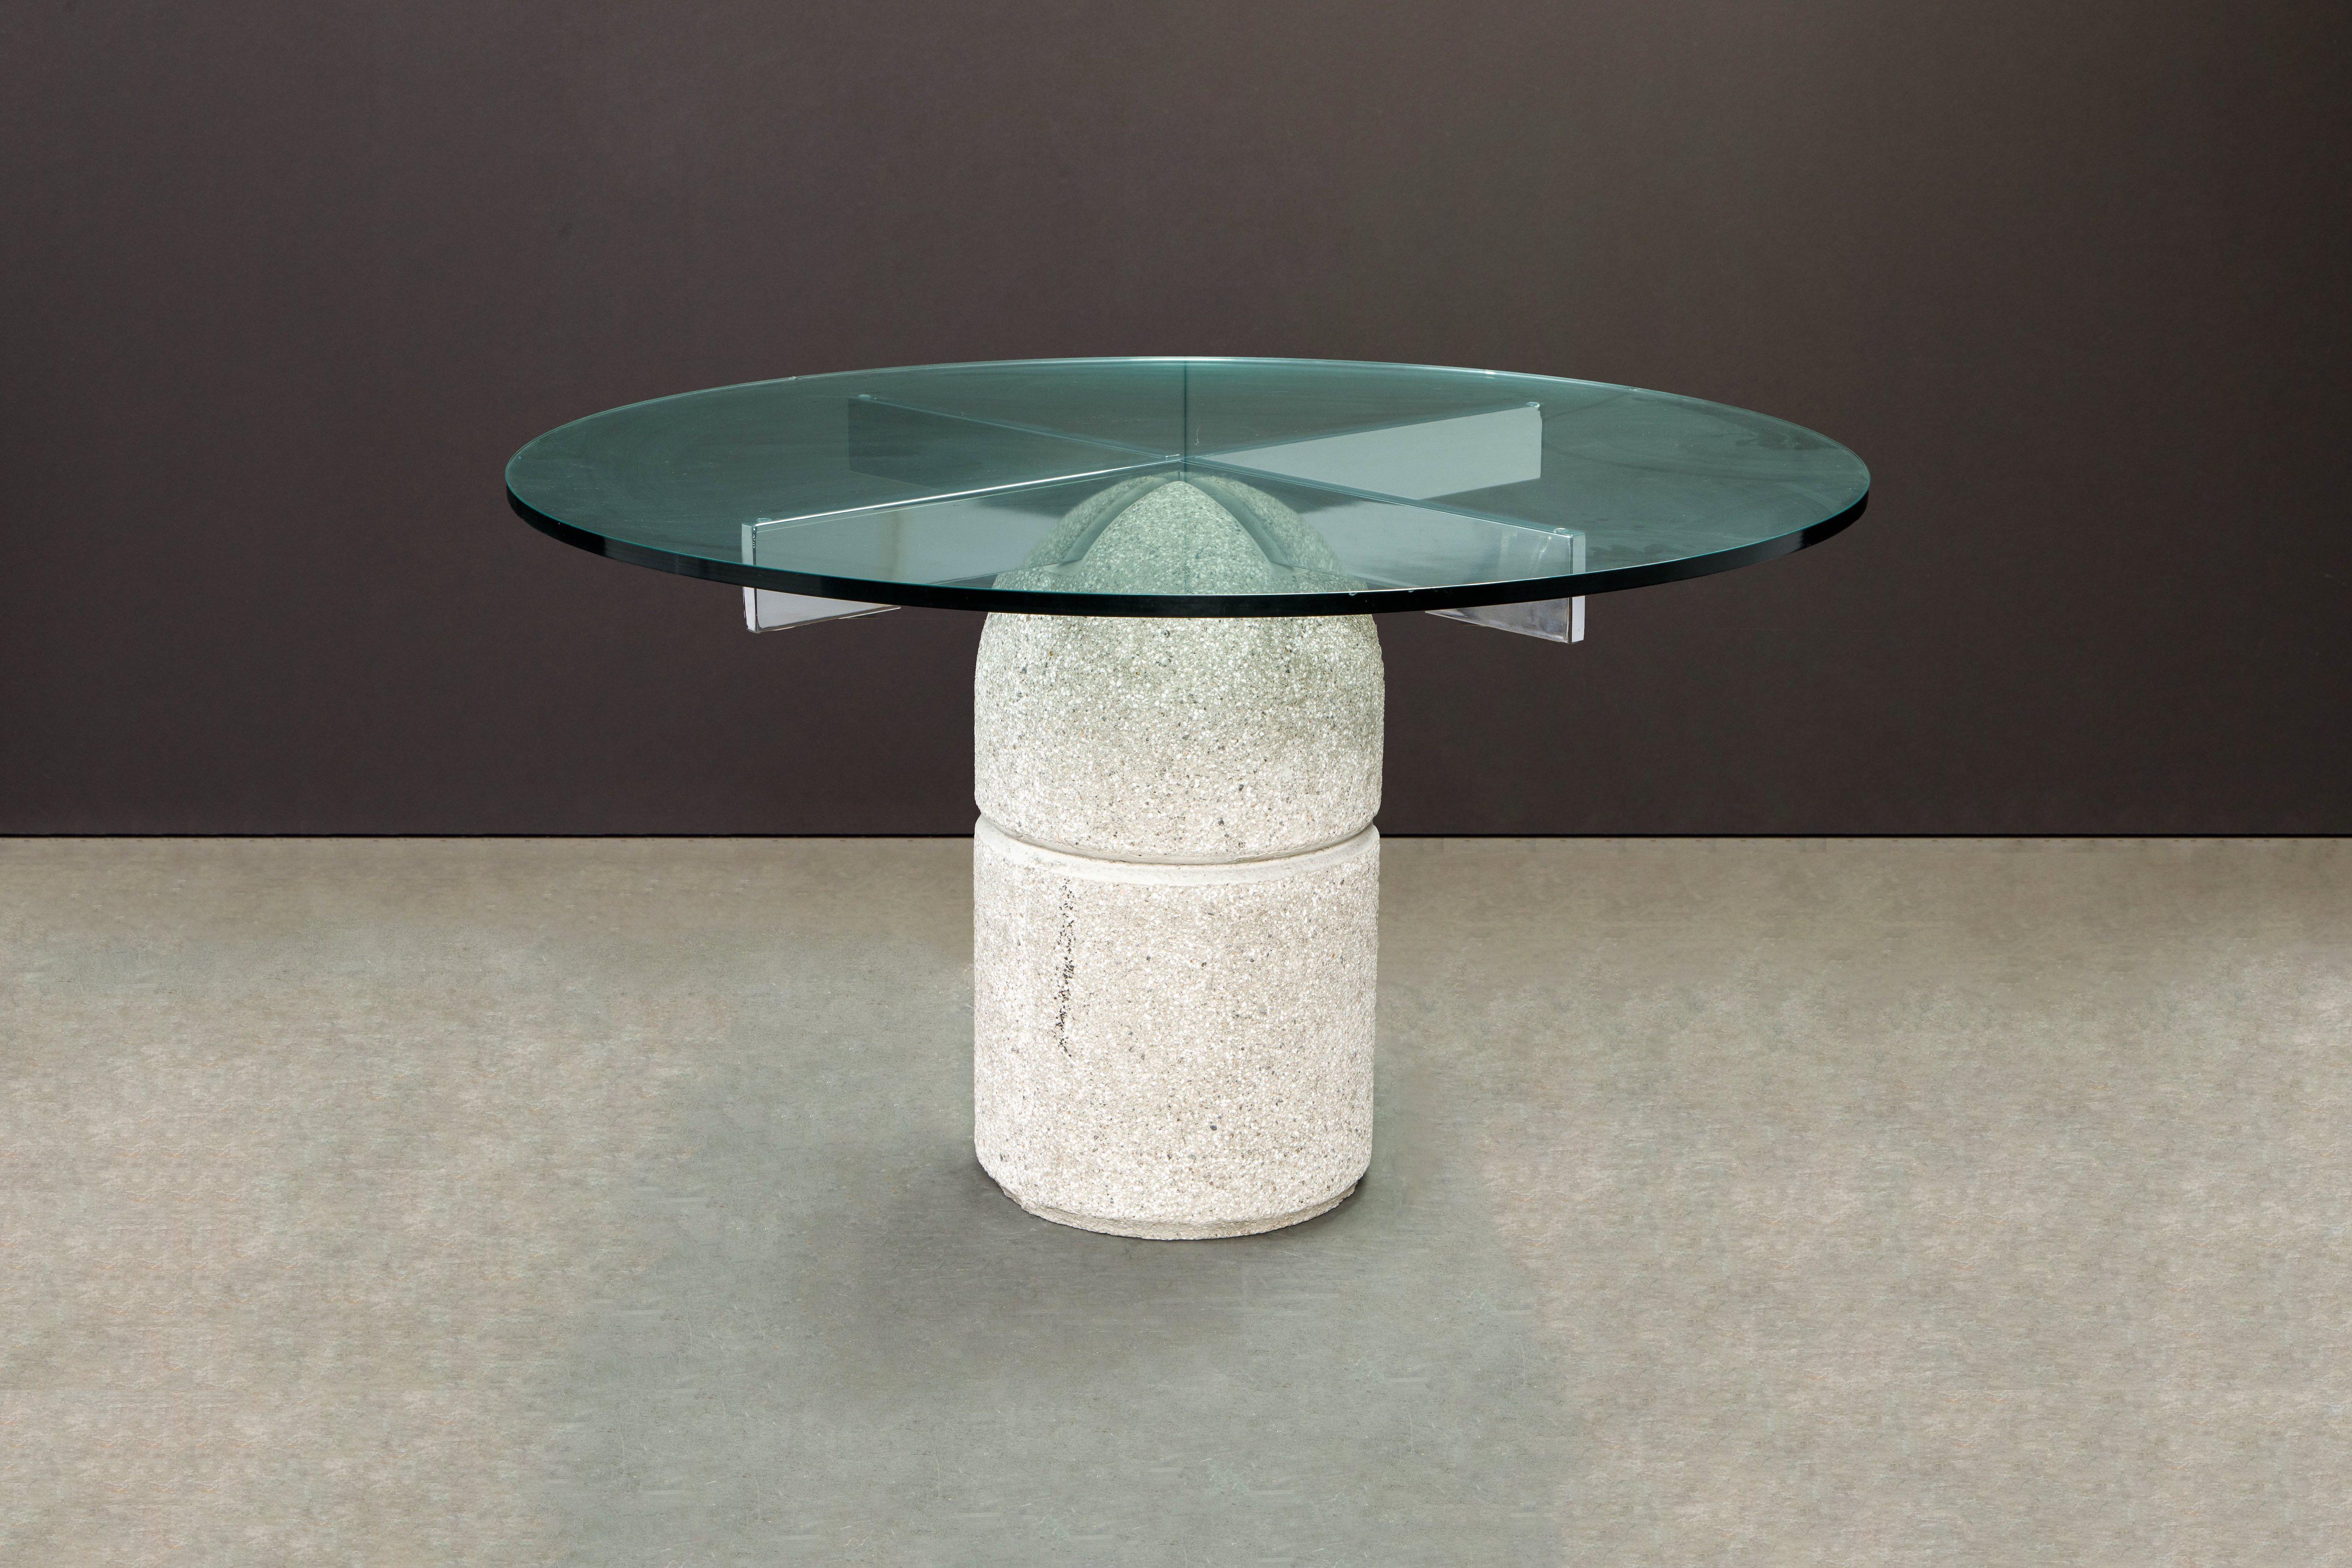 This sleek modern 'Paracarro' dining table by Giovanni Offredi for Saporiti Italia was sculpted from concrete and chromed steel during the 1970s in Italy. A .75